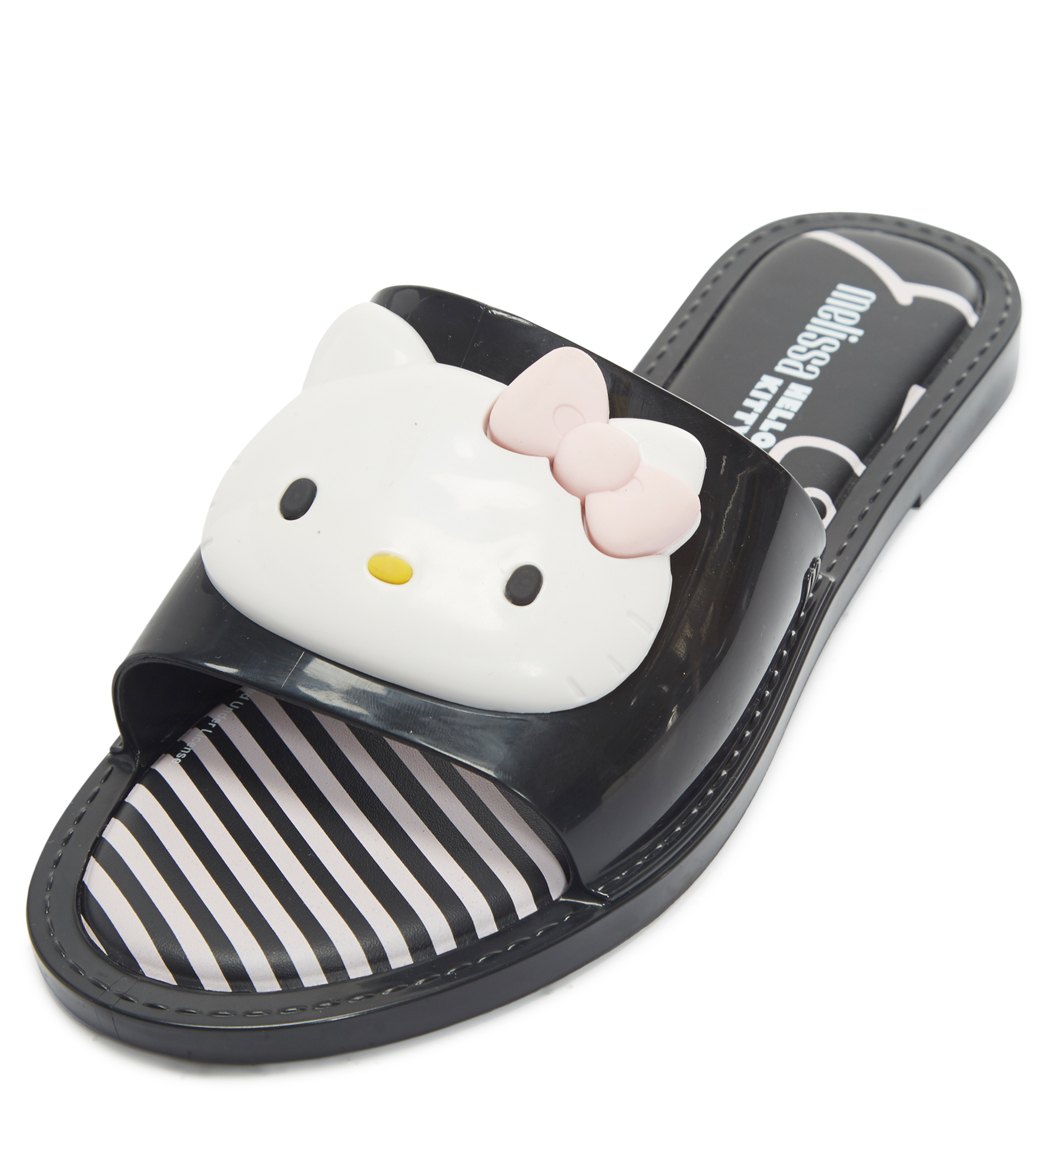 Mel By Melissa Slippers + Hello Kitty Shoes - Black/White 6 - Swimoutlet.com